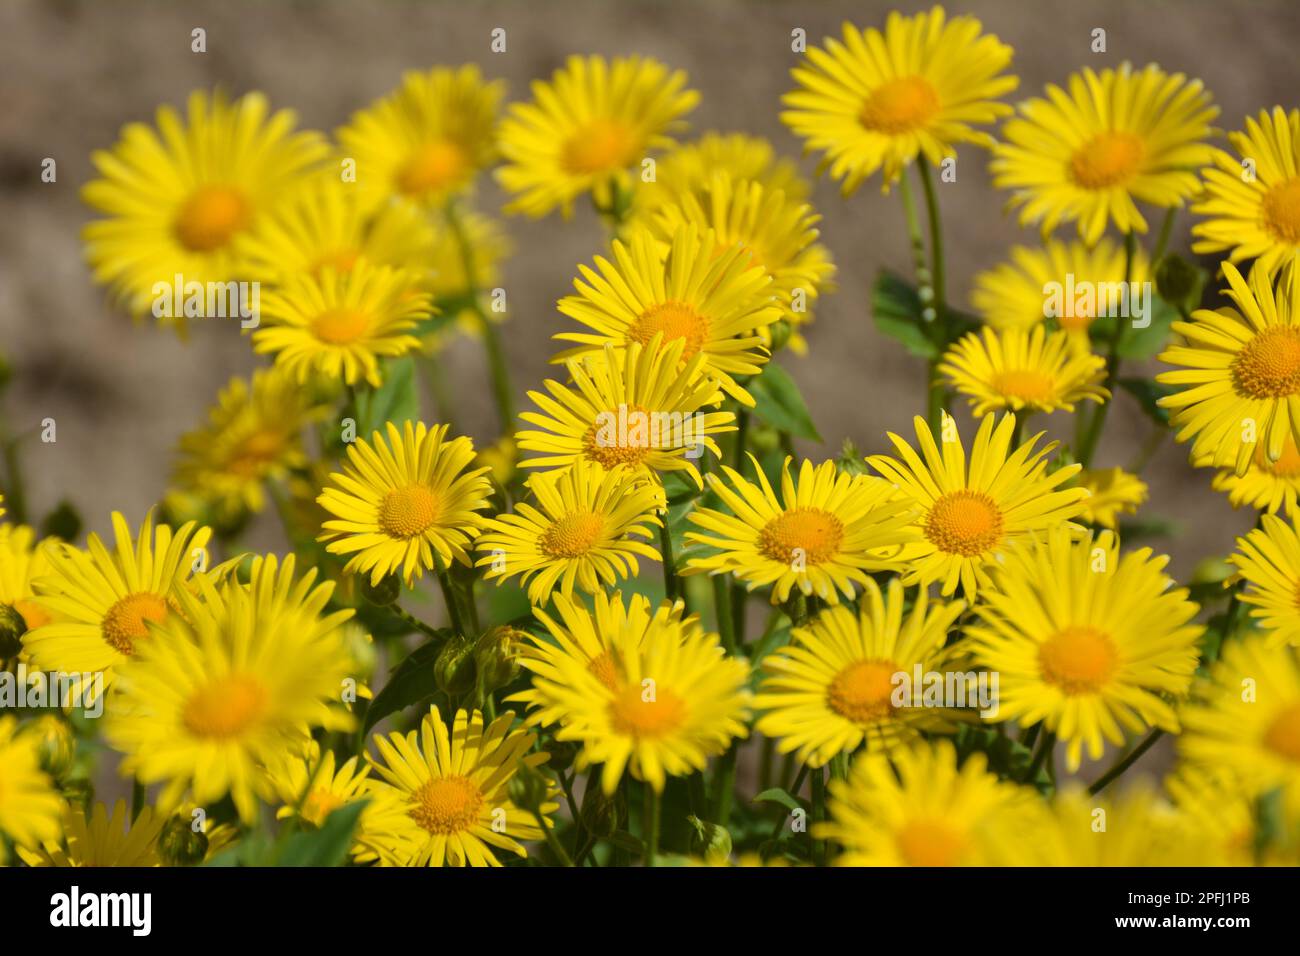 Doronicum orientale blooms on a flower bed in the garden Stock Photo